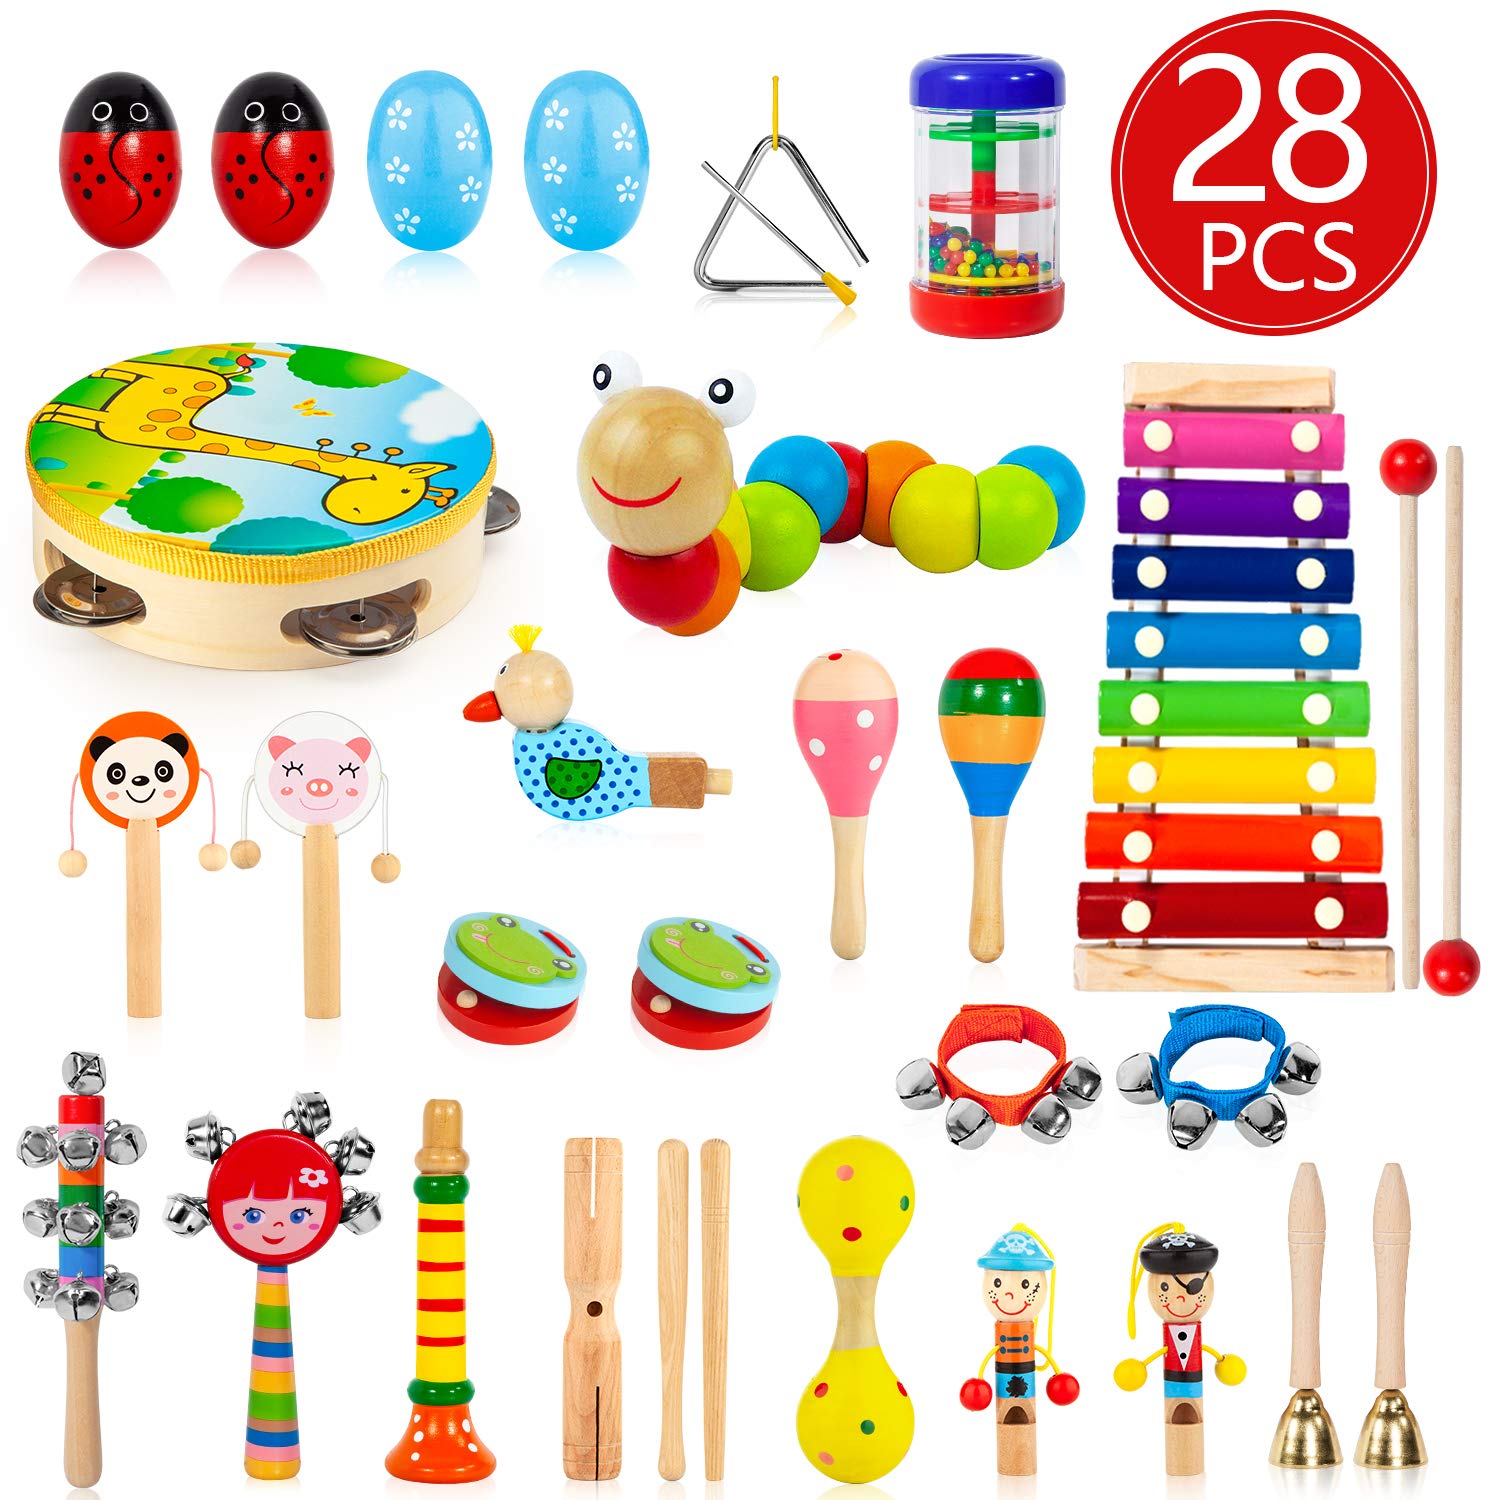 AOKIWO Kids Musical Instruments, 28Pcs 19Types Wooden Instruments Tambourine Xylophone Toys for Kids Children, Preschool Educational Learning Musical Toys for Boys Girls